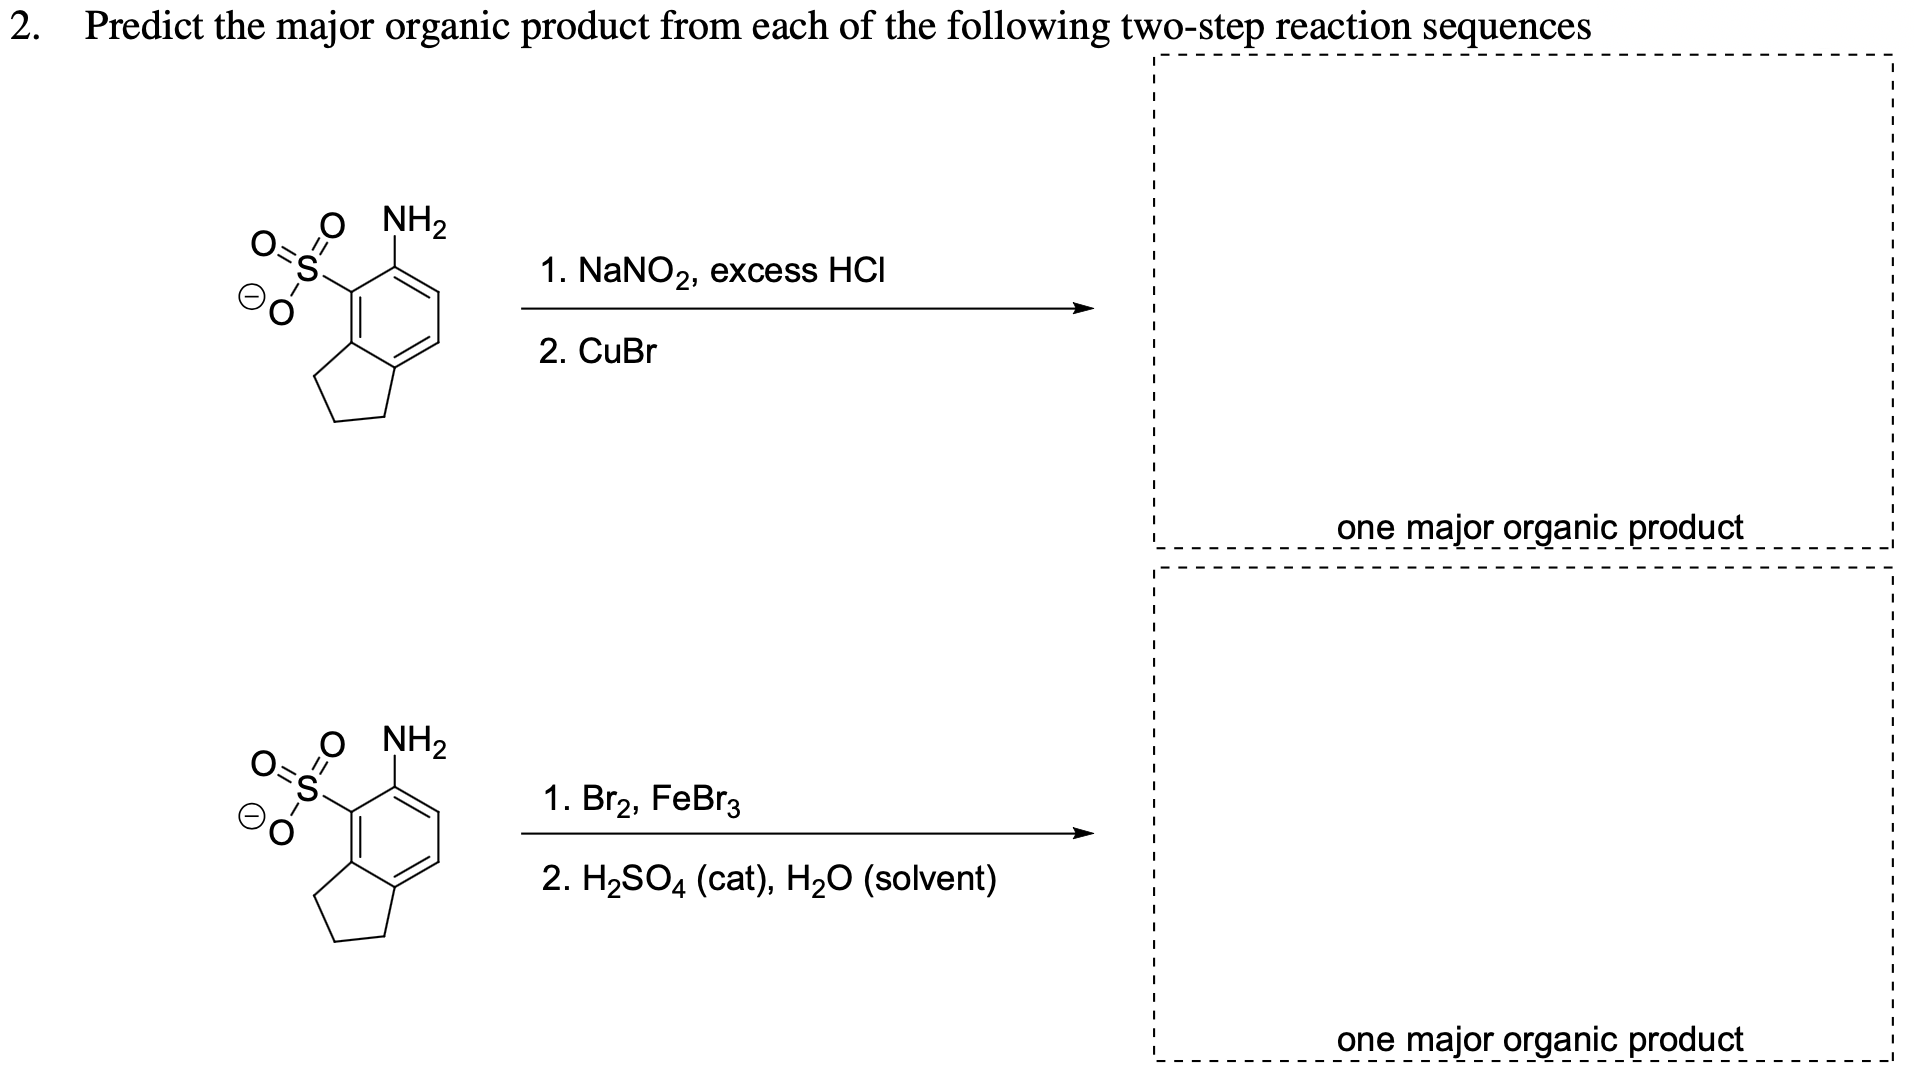 Predict the major organic product from each of the following two-step reaction sequences
NH2
O=S
1. NaNO2, excess HCI
2. CuBr
one major organic product
NH2
1. Br2, FeBr3
2. H,SO4 (cat), Hz0 (solvent)
